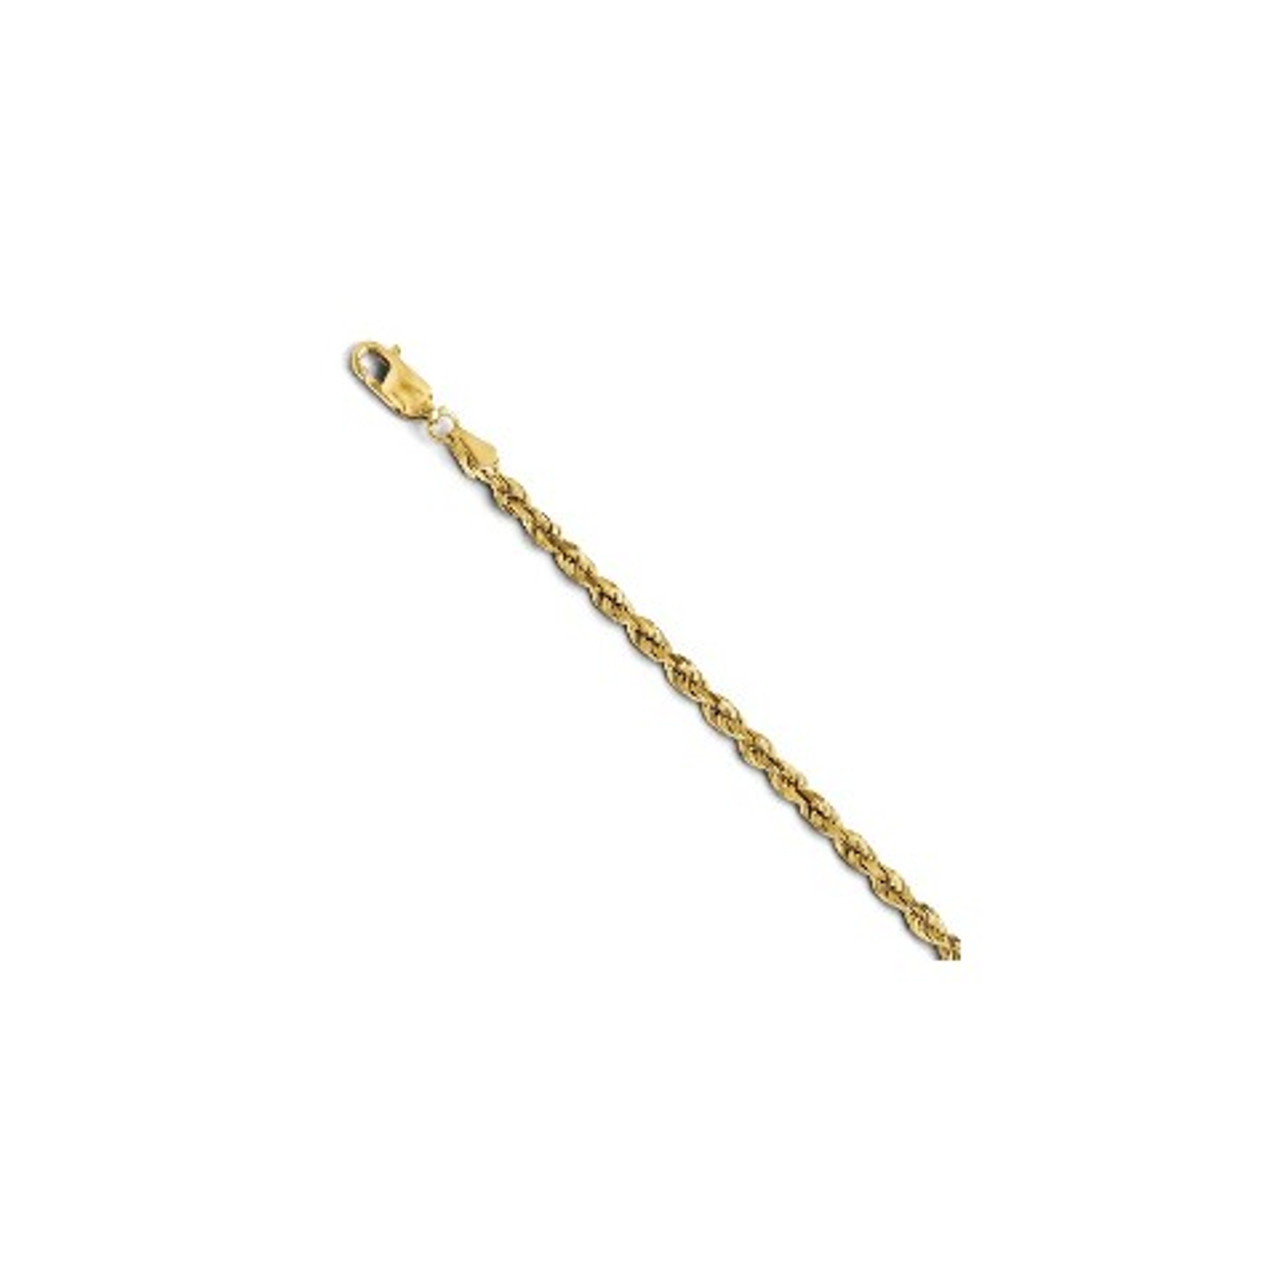 Leslie's 14K Yellow Gold 3mm Diamond-cut Rope Chain Necklace - Length 24''  inches - (B18-732) - Roy Rose Jewelry